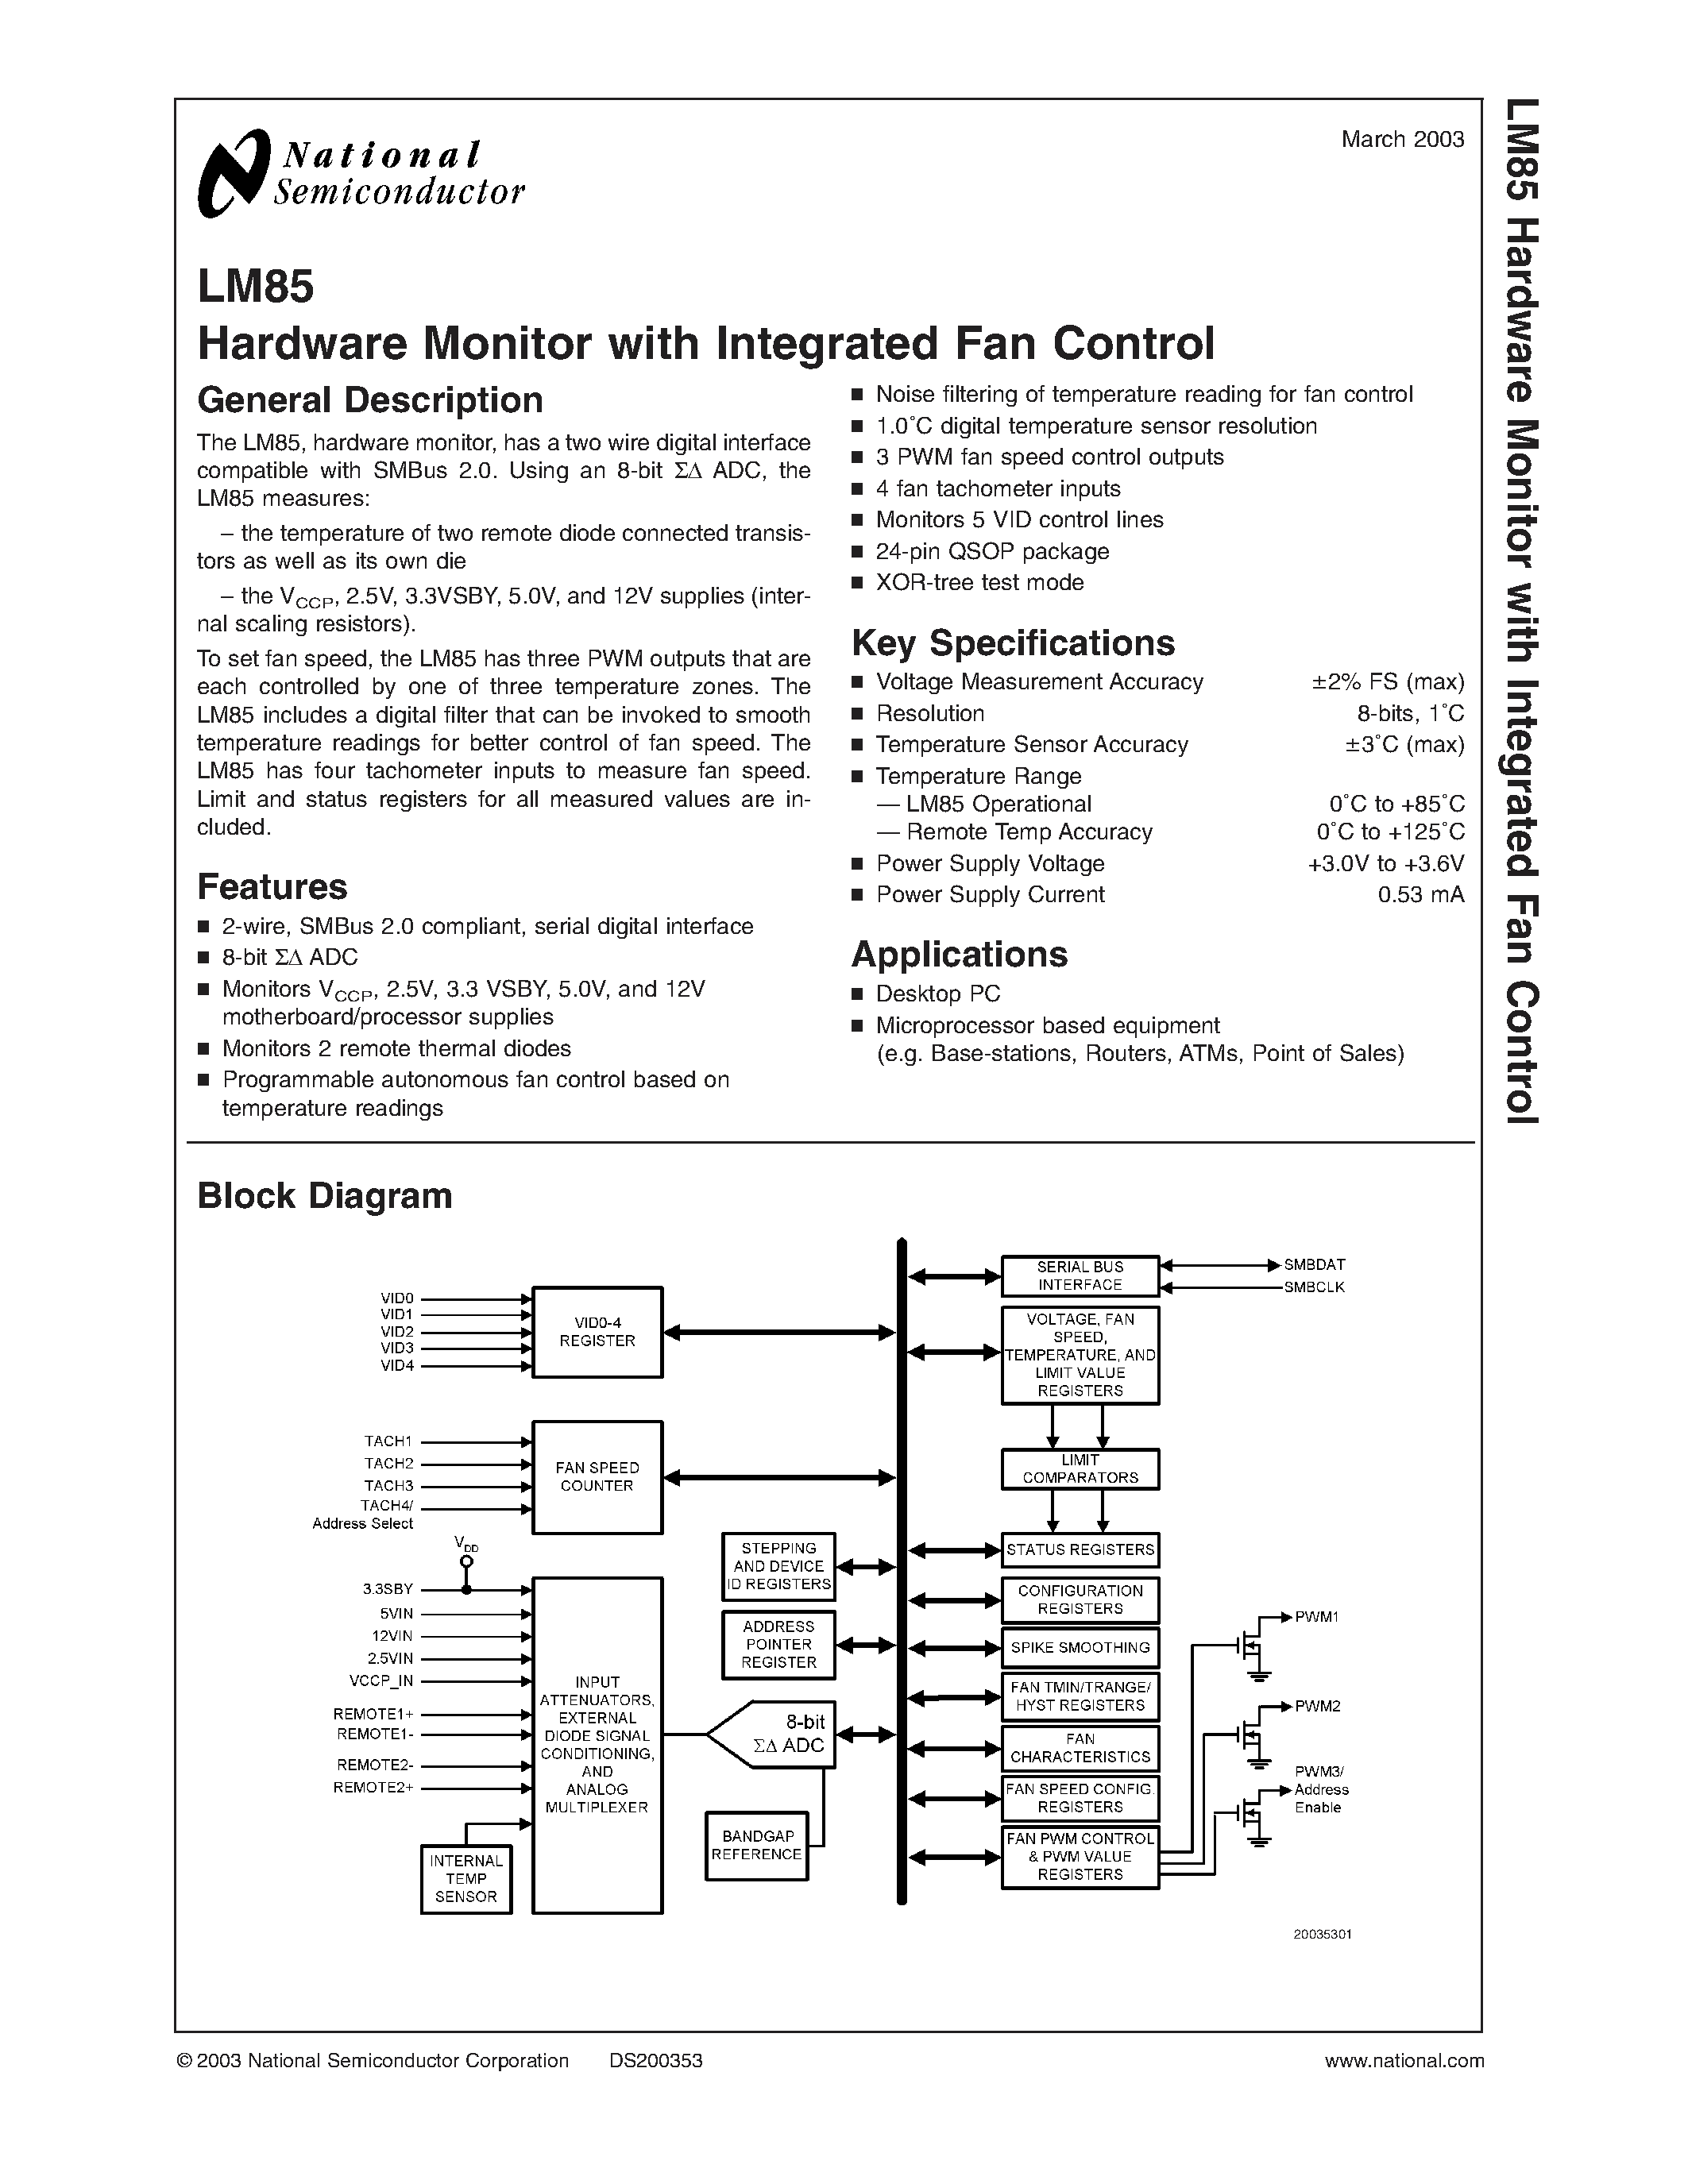 Datasheet LM85 - Hardware Monitor with Integrated Fan Control page 1